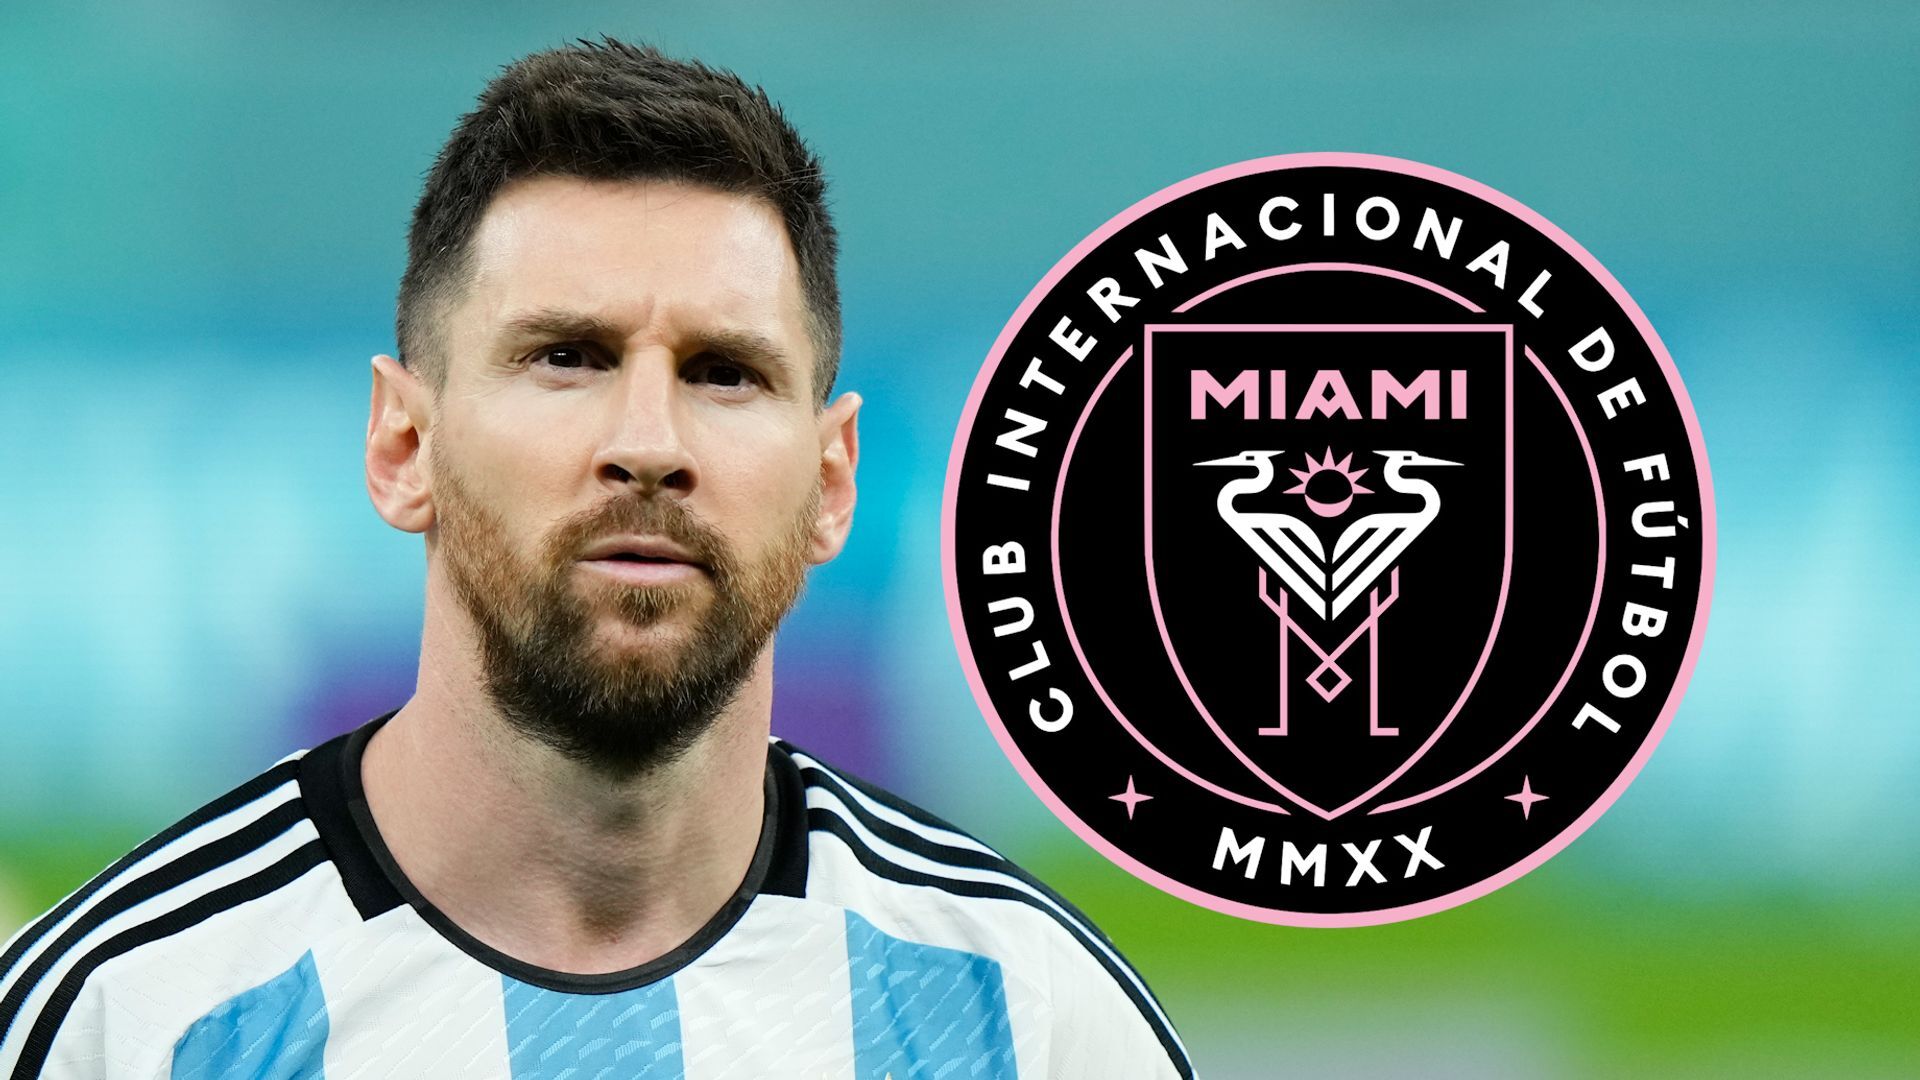 In a shocking score for MLS, superstar Lionel Messi reportedly turned down .5B from Saudi Arabia's oil coffers to play for Inter Miami.